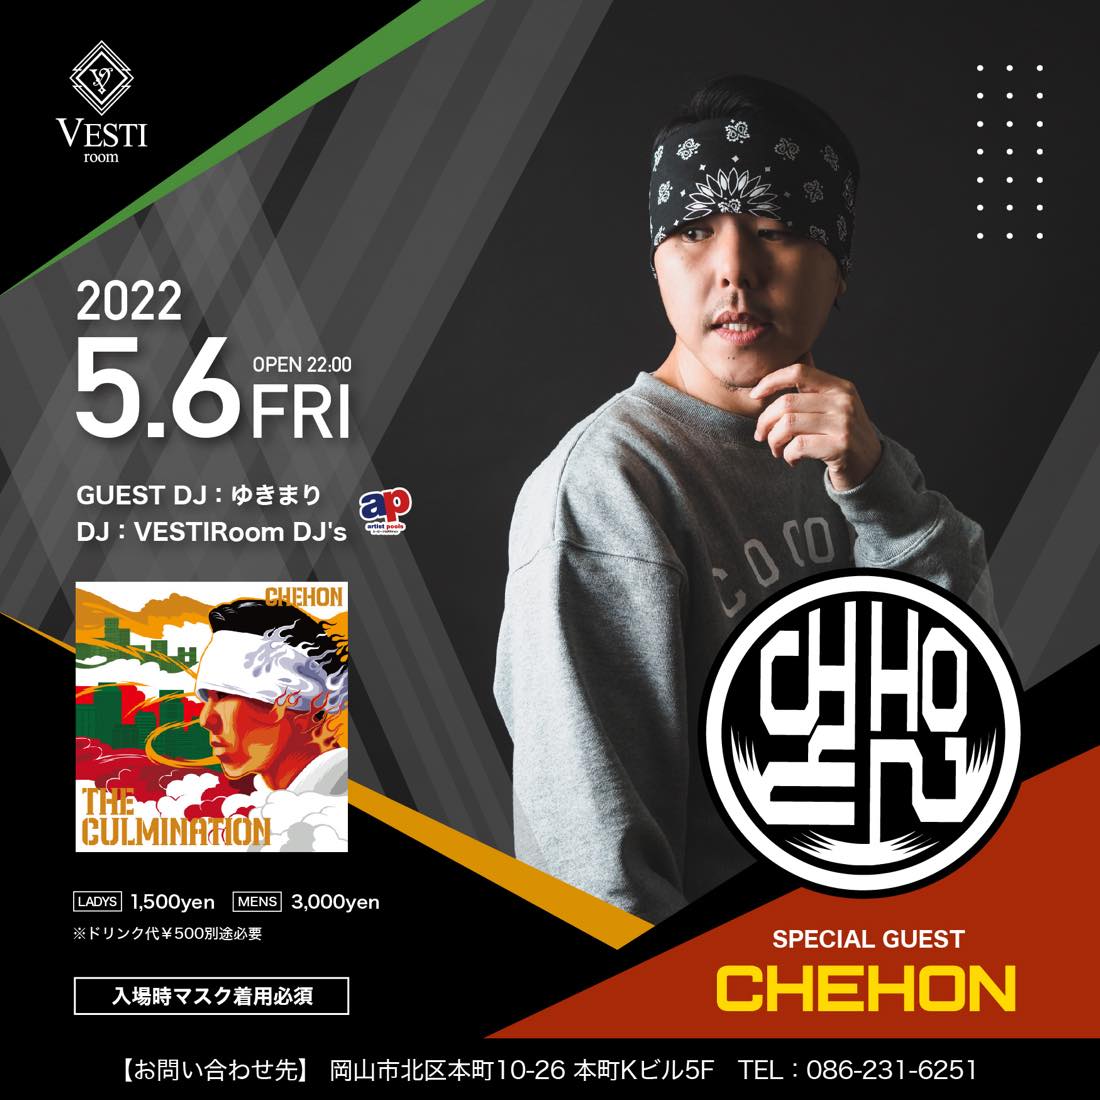 SPECIAL GUEST : CHEHON